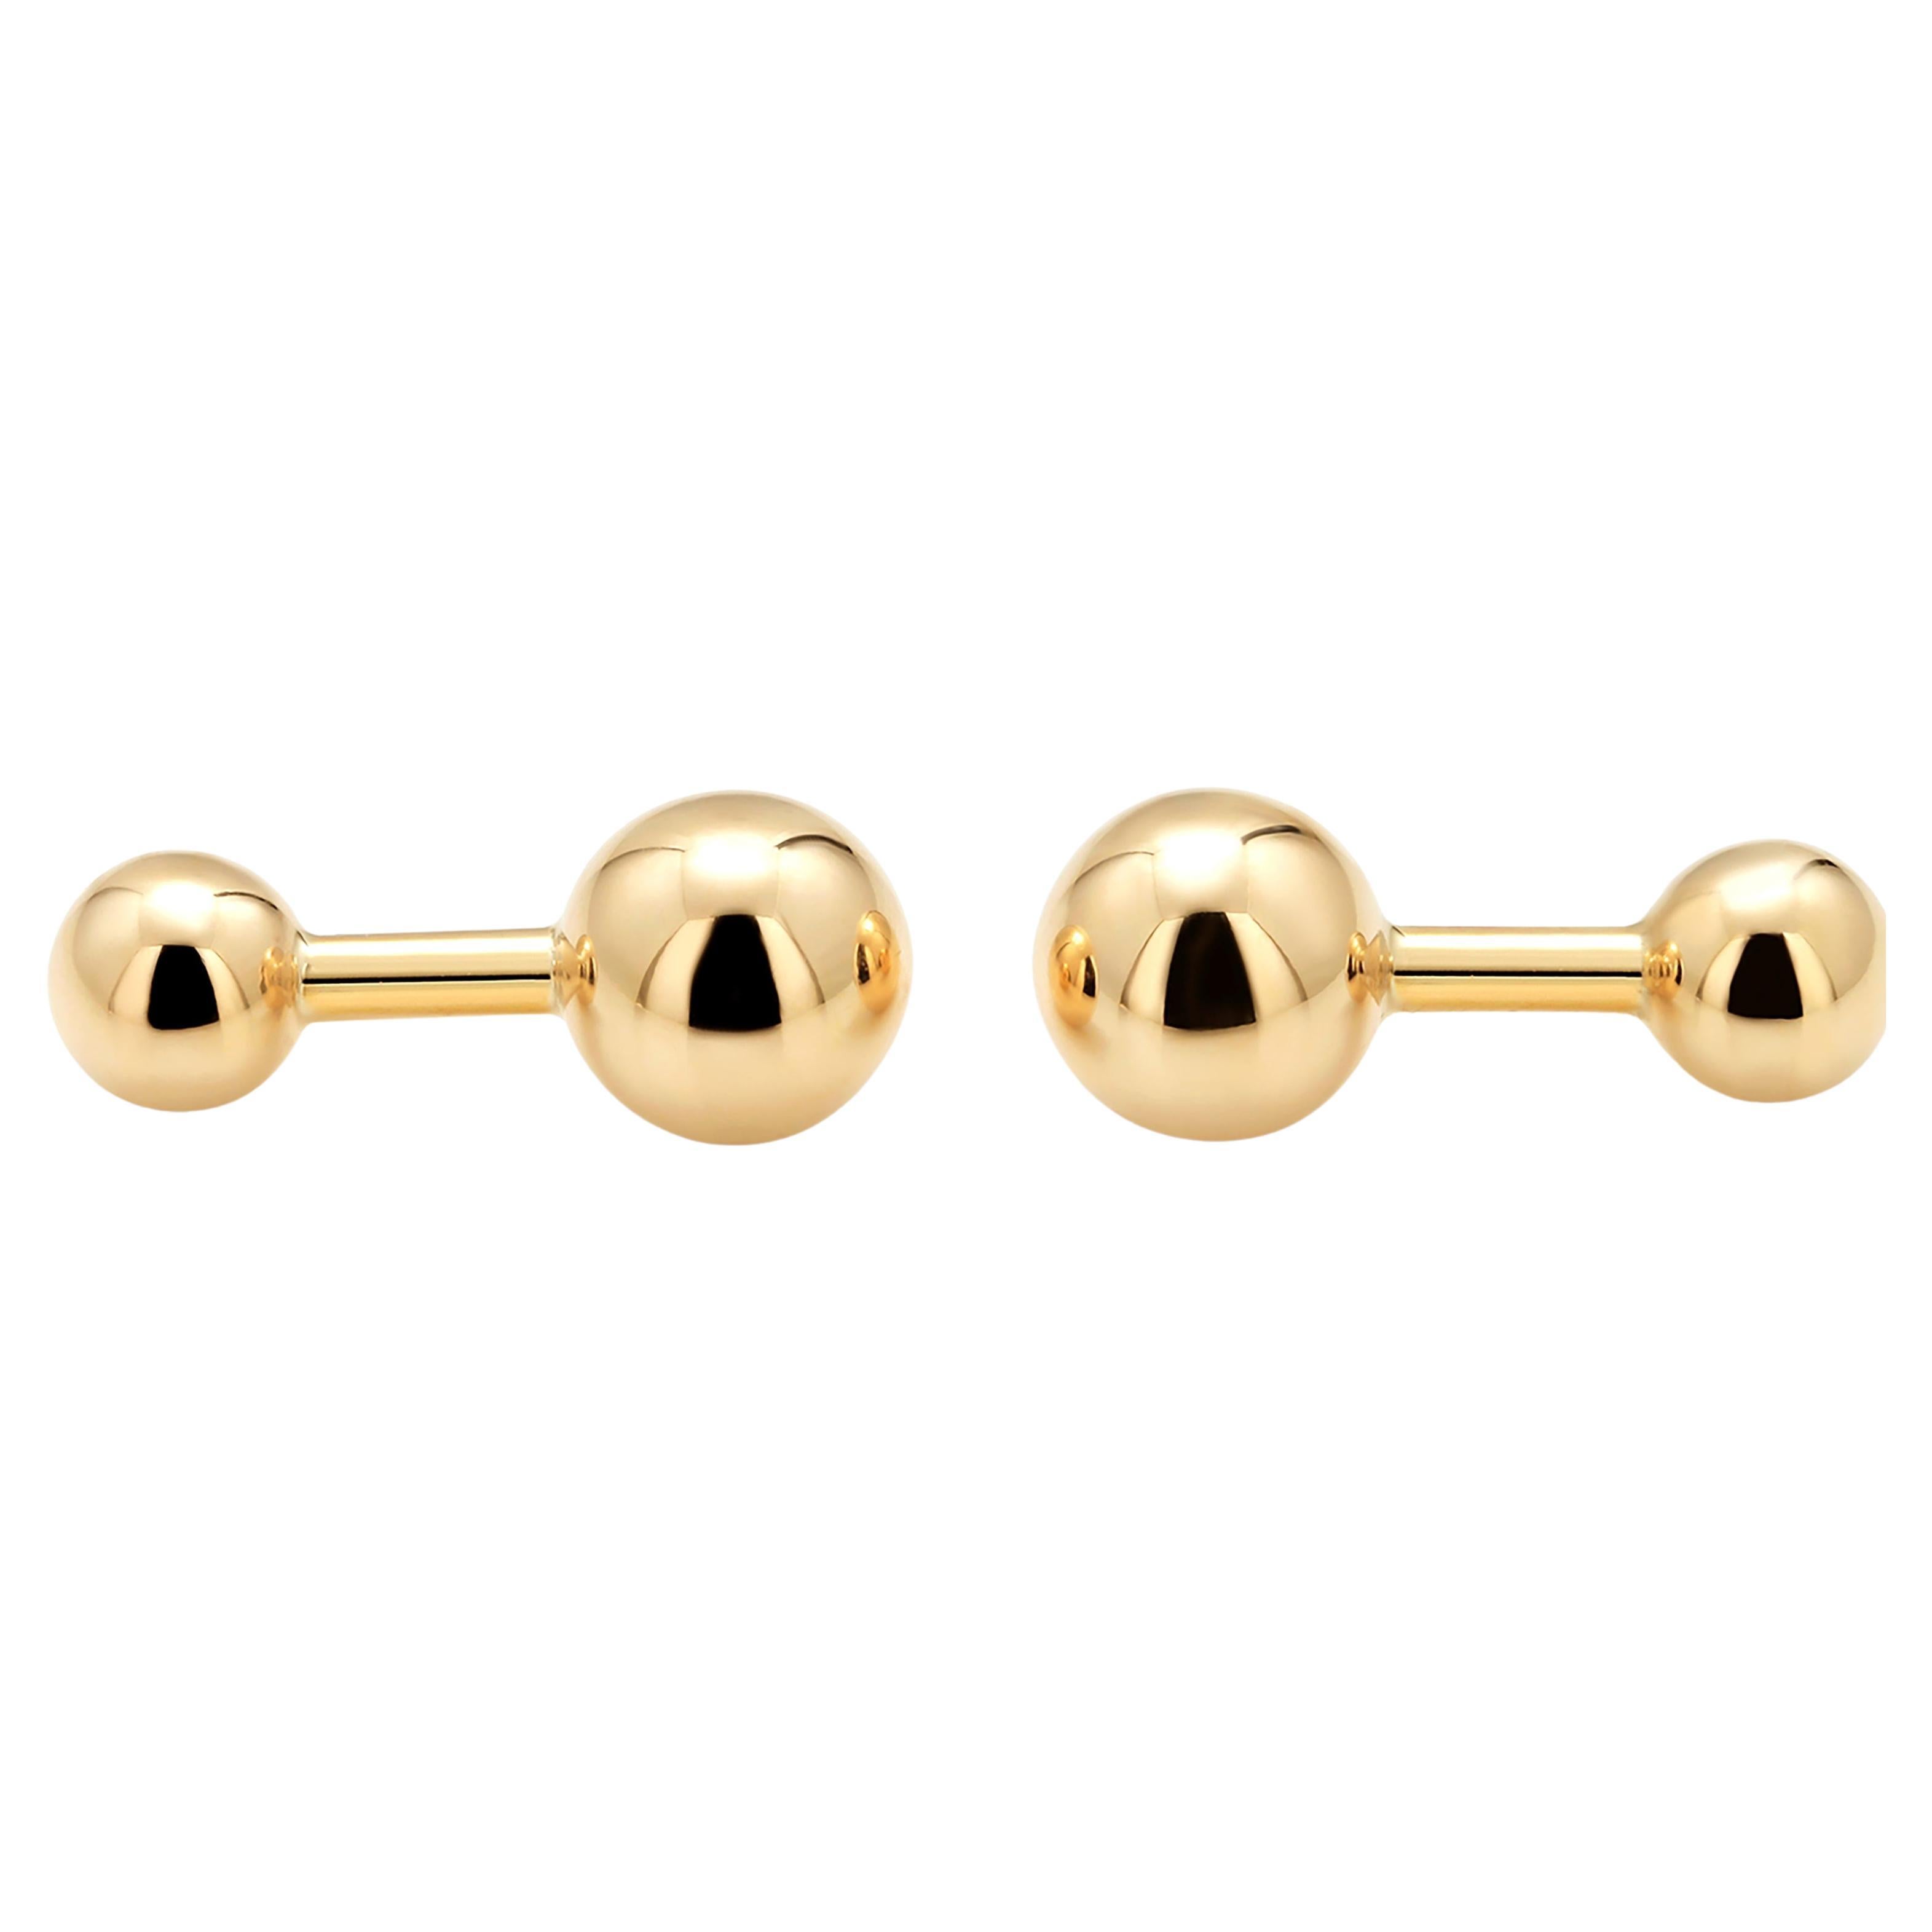 Tiffany and Co. France Gold Ball and Claw Cufflinks at 1stDibs